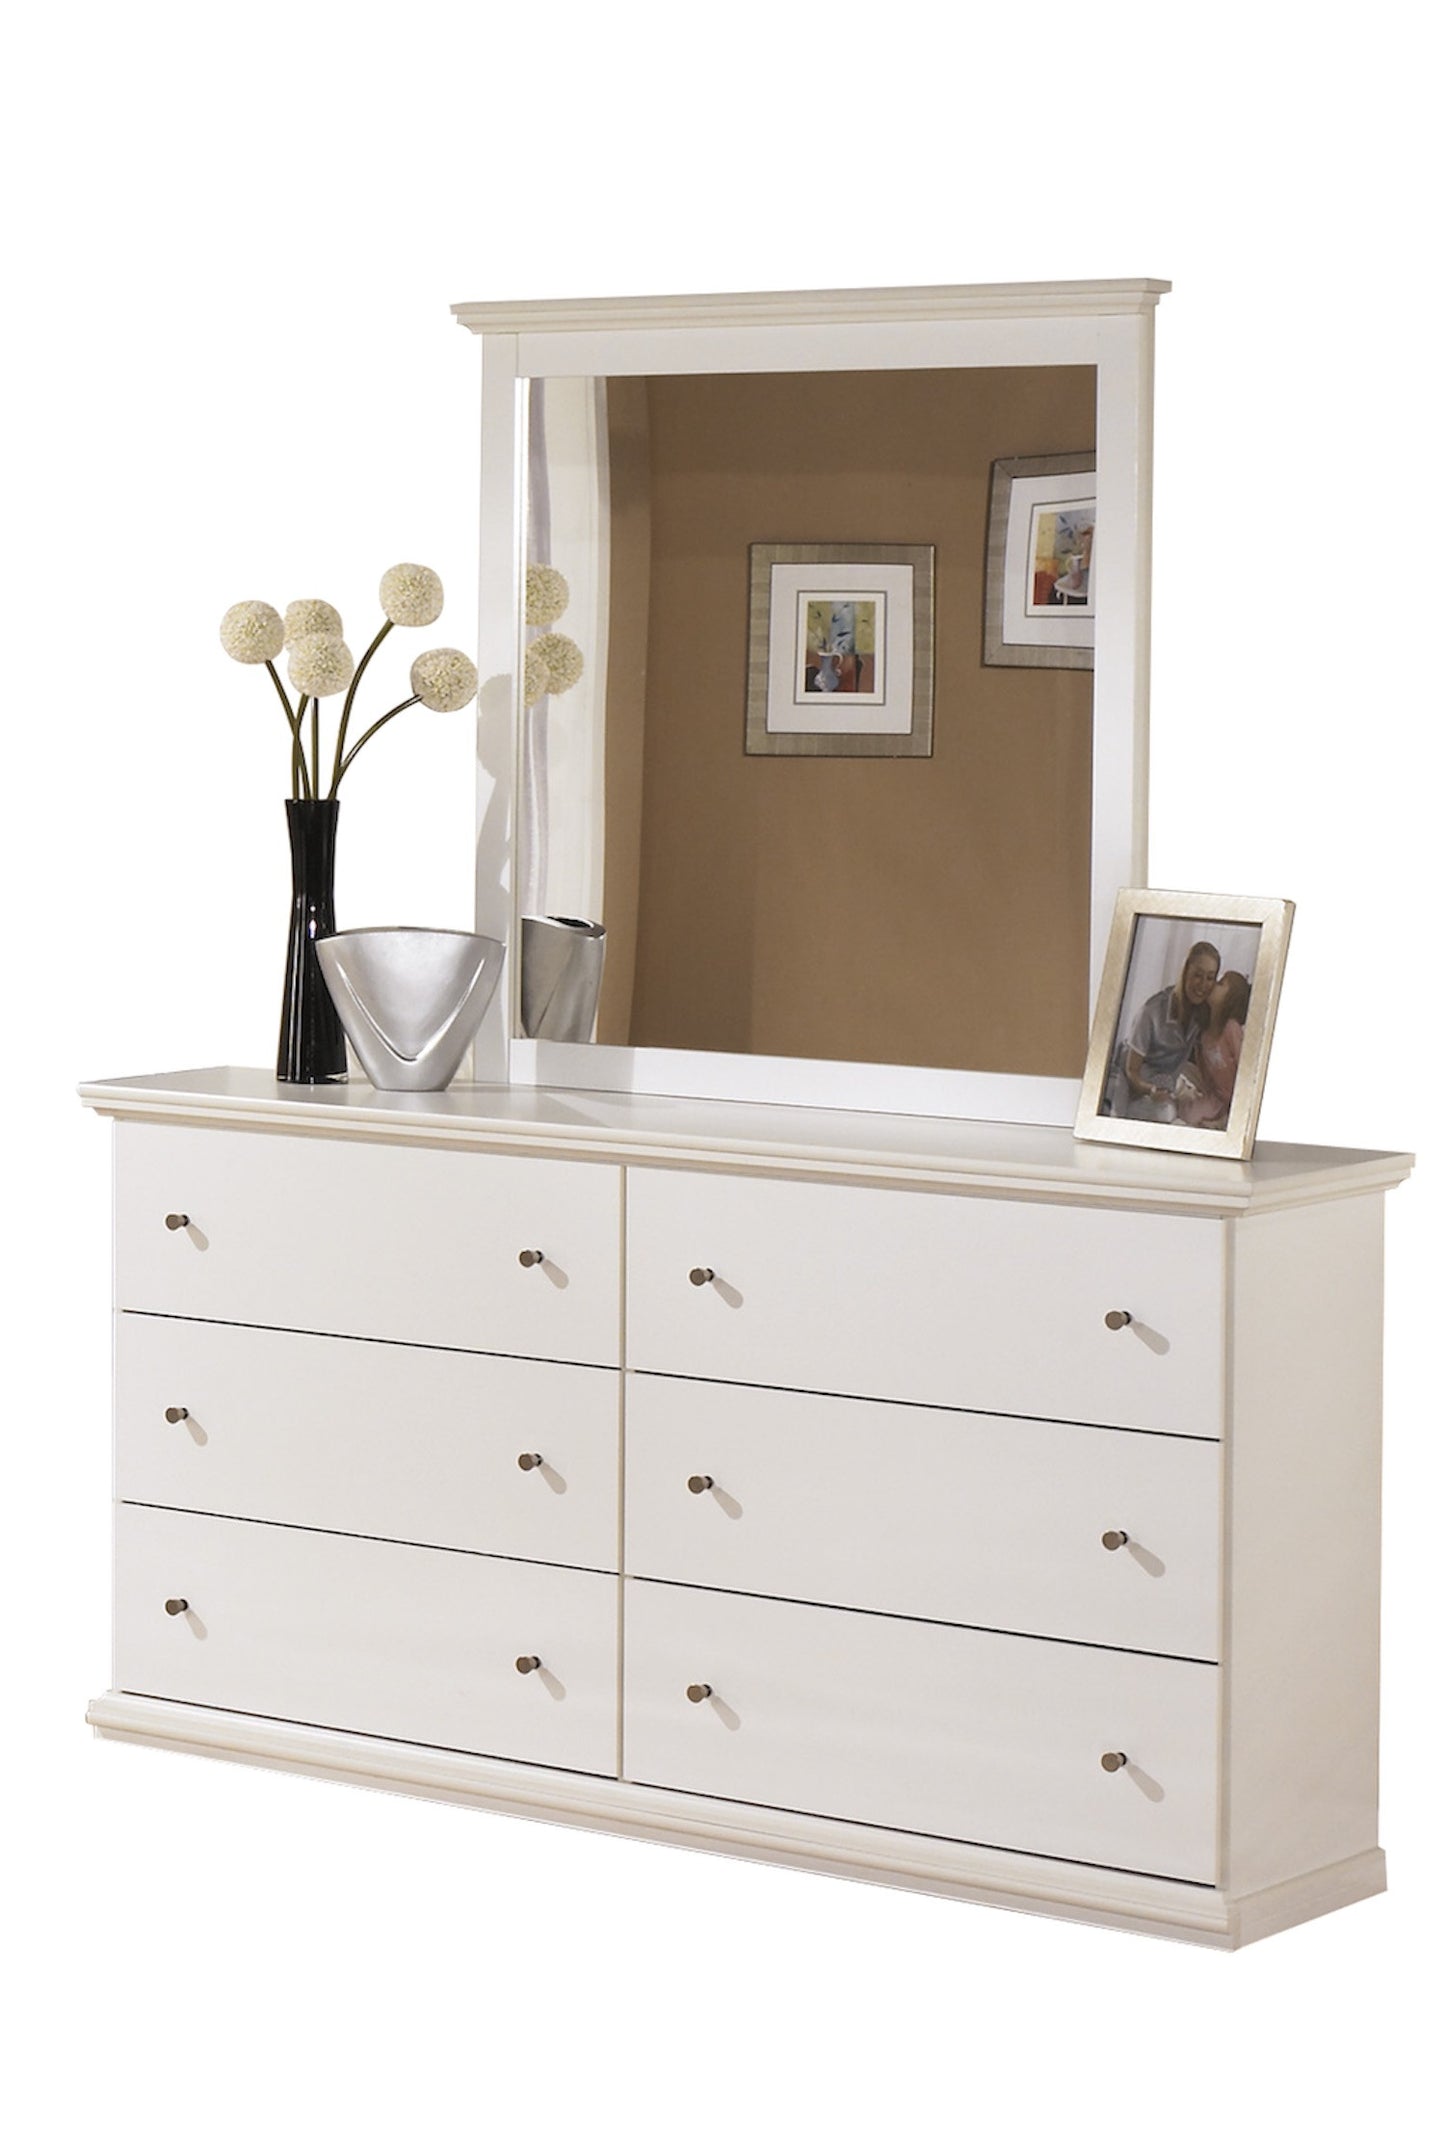 Ashley Bostwick Shoals Six Drawer Dresser and Mirror in White